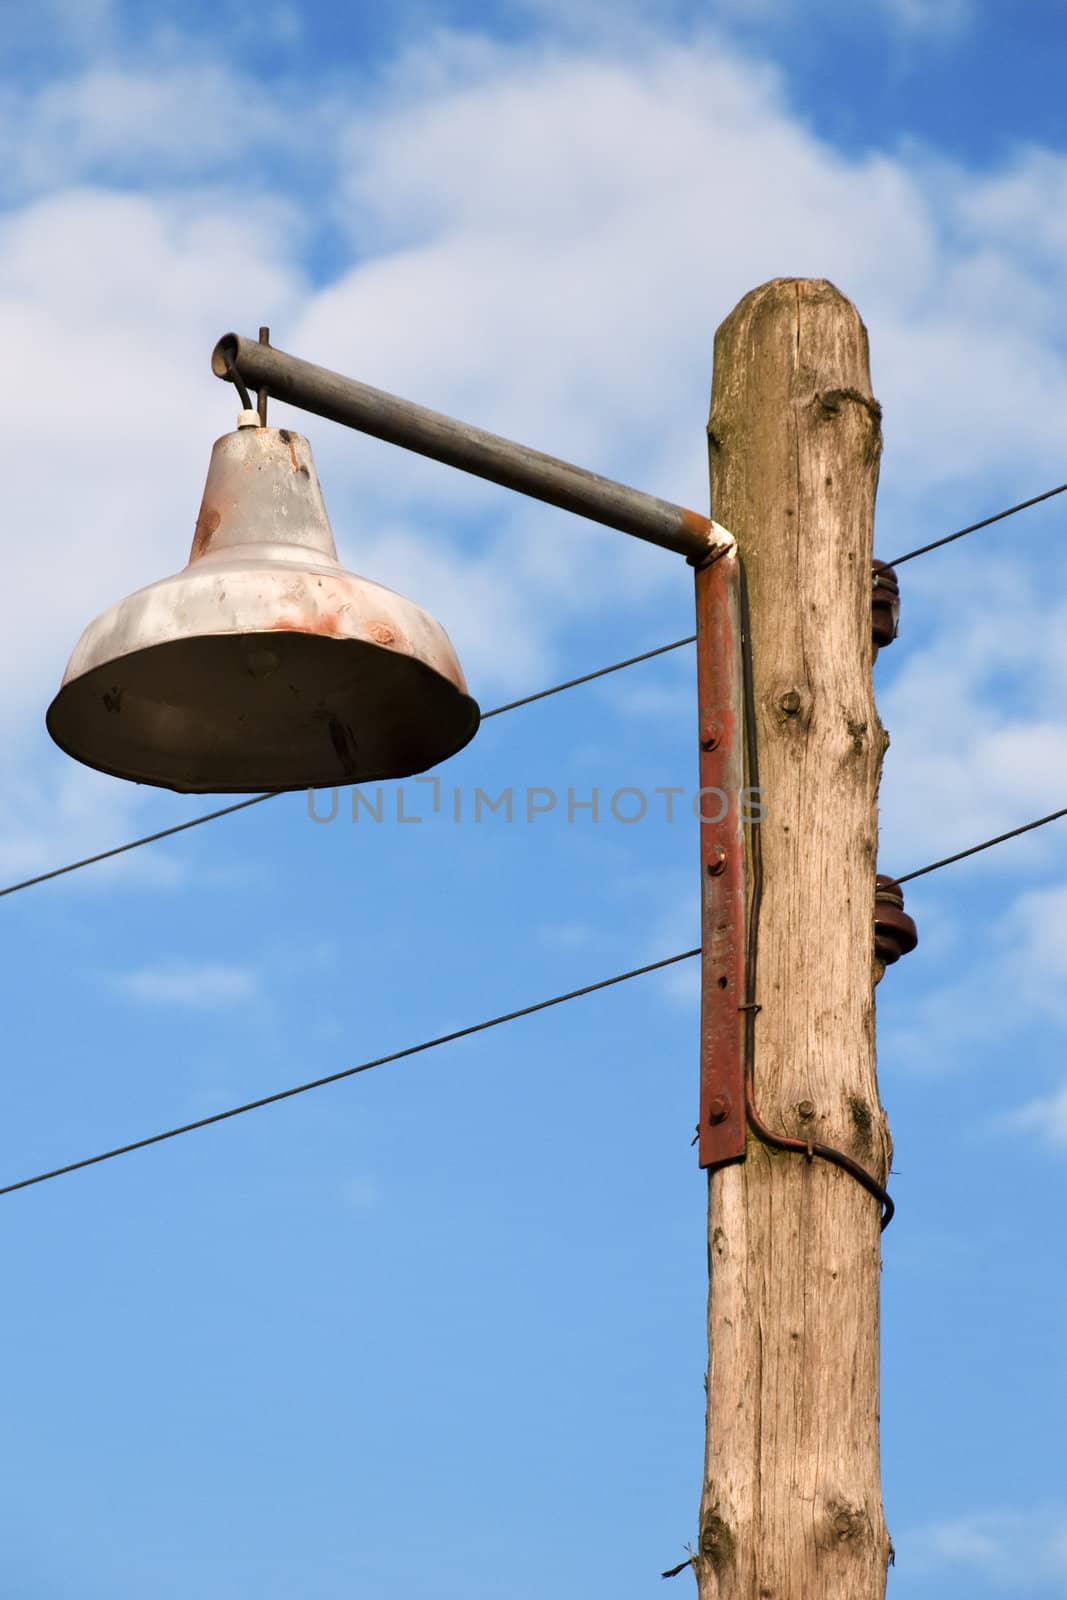 Old Lantern on a Wooden Pole Against a Blue Sky